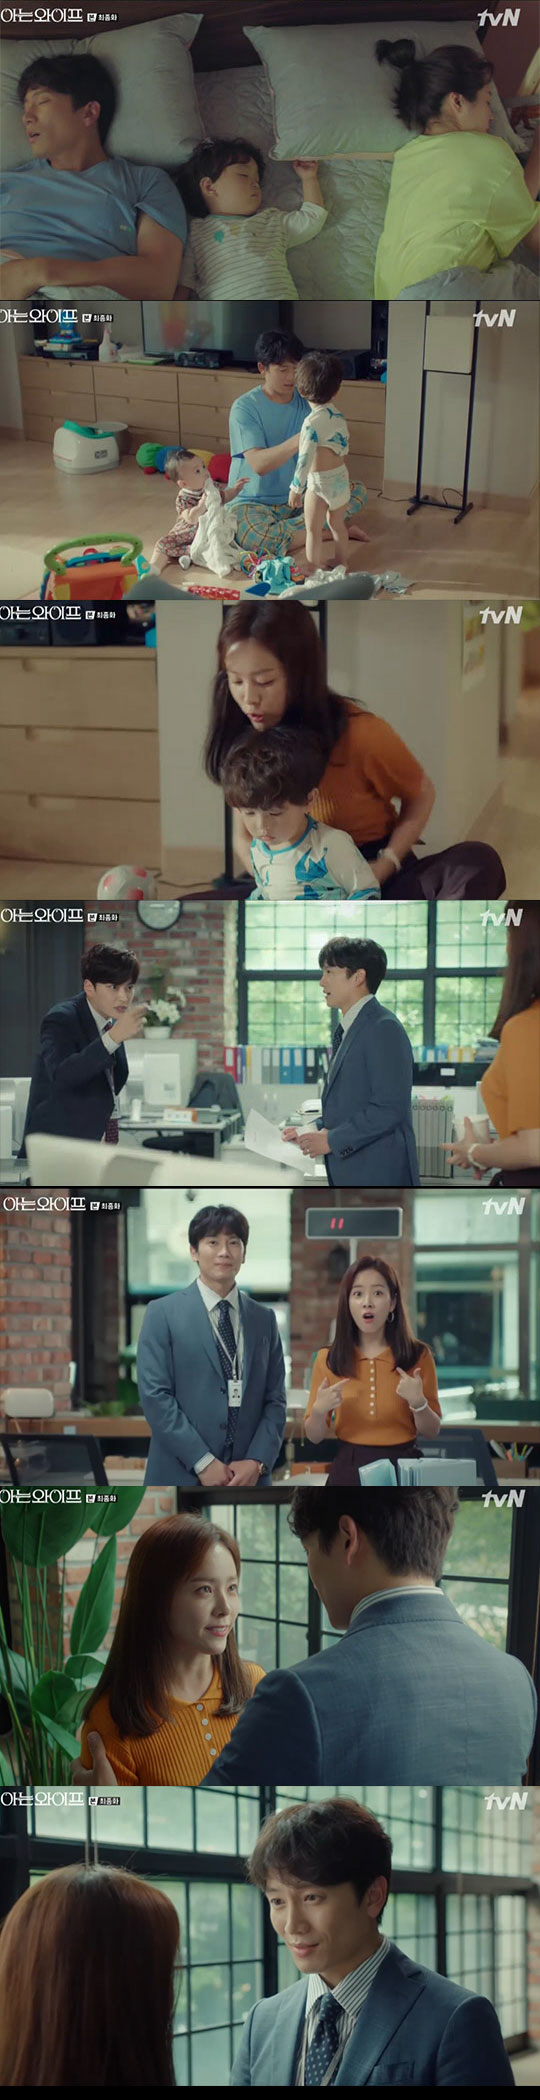 A Knowing Wife Ji Sung and Han Ji-min started their real life as a couple; Han Ji-min was promoted to head the team.On the 20th, TVN A Knowing Wife final episode showed Cha Ju-hyuk (Ji Sung) and Seo Woo Jin (Han Ji-min), who started their real life as a couple.Cha Ju-hyuk and Seo Woo Jin confirmed their love through a roller coaster confession.The couple, who had two children, woke up suddenly, but realized they had set the alarm an hour early.Cha Ju-hyuk and Seo Woo Jin sent their children to kindergarten, and then were co-deceived to the bank.The two appeared with coffee as if they were discussing it, but it was caught by Yoon Jong-hoo (Jang Seung-jo).Yoon Jong-hoo said, I went to work earlier, but there is no bag, Seo Woo Jin, put down the coffee cup that you can not eat.On the same day, Jang Man-ok (Kim Soo-jin) was promoted to the head of the branch office of another branch, and Seo Woo Jin was promoted to the head of the reception team.Seo Woo Jin was only promoted and Cha Ju-hyuk was embarrassed to remain as a substitute, but Cha Ju-hyuk laughed brightly and congratulated him.Seo Woo Jin said, I once abandoned me, but I was glad to marry you again.